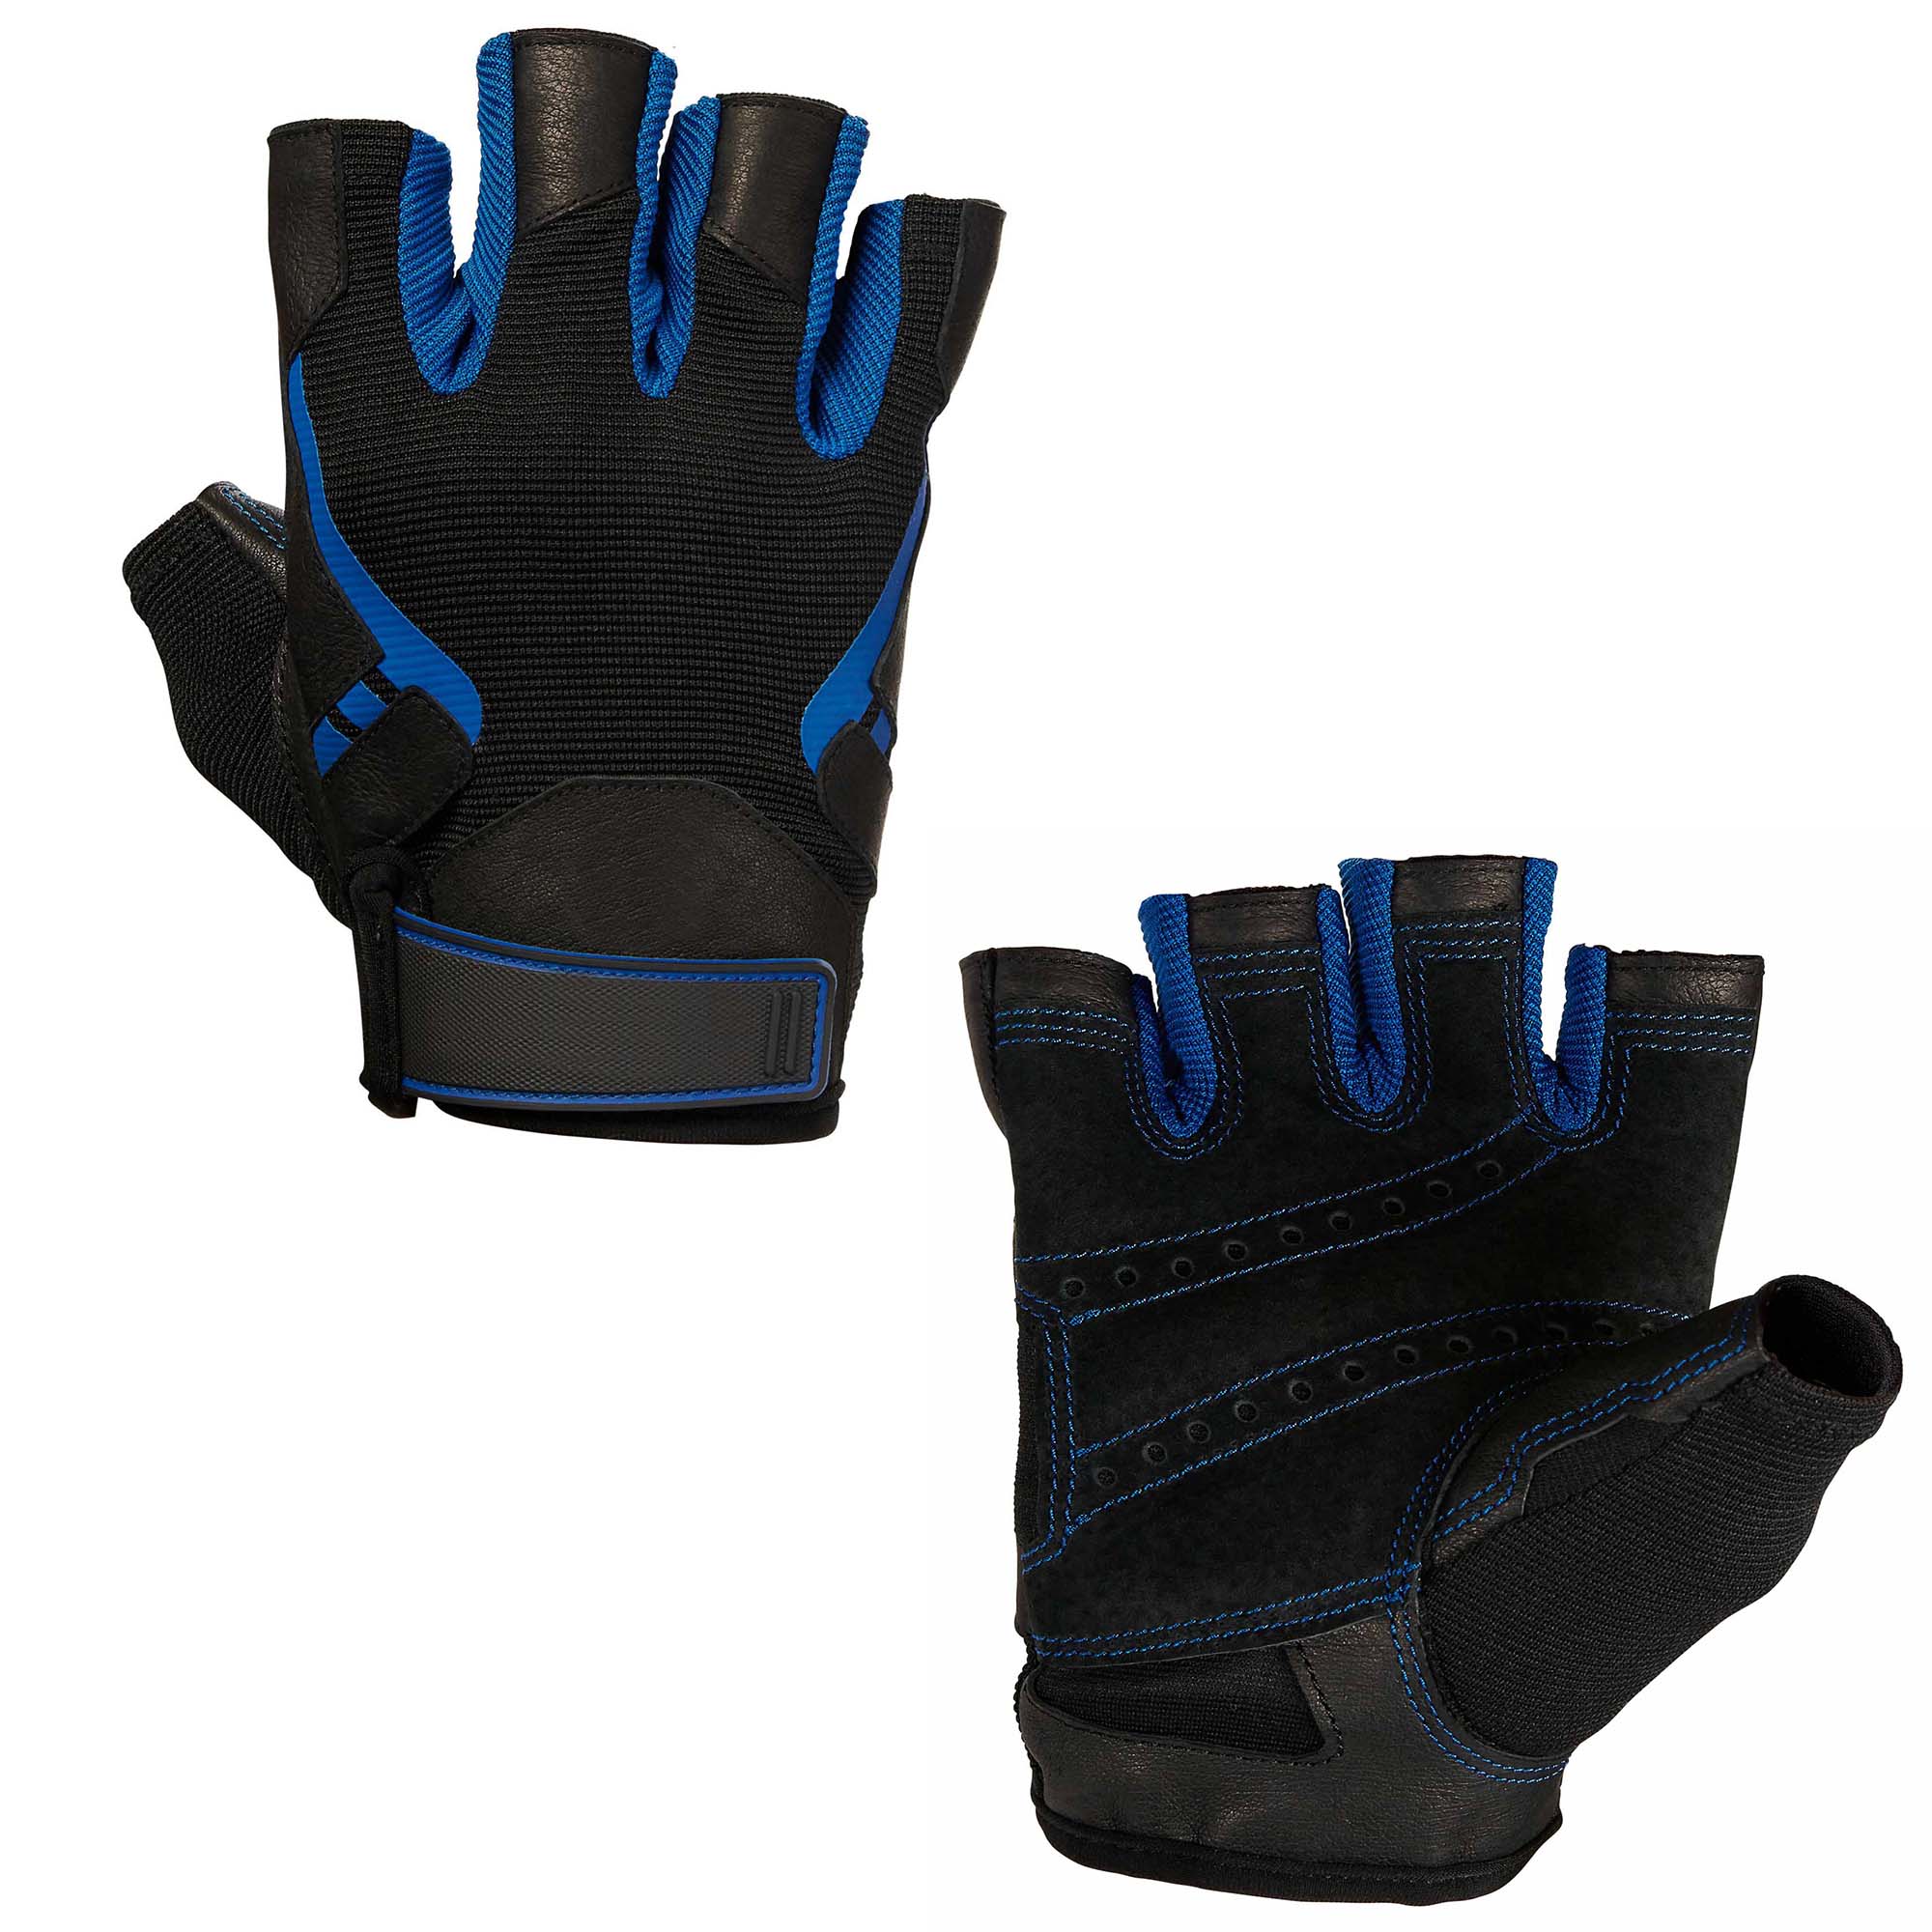 Good reputation leather palm breathable half-finger weight lifting gloves